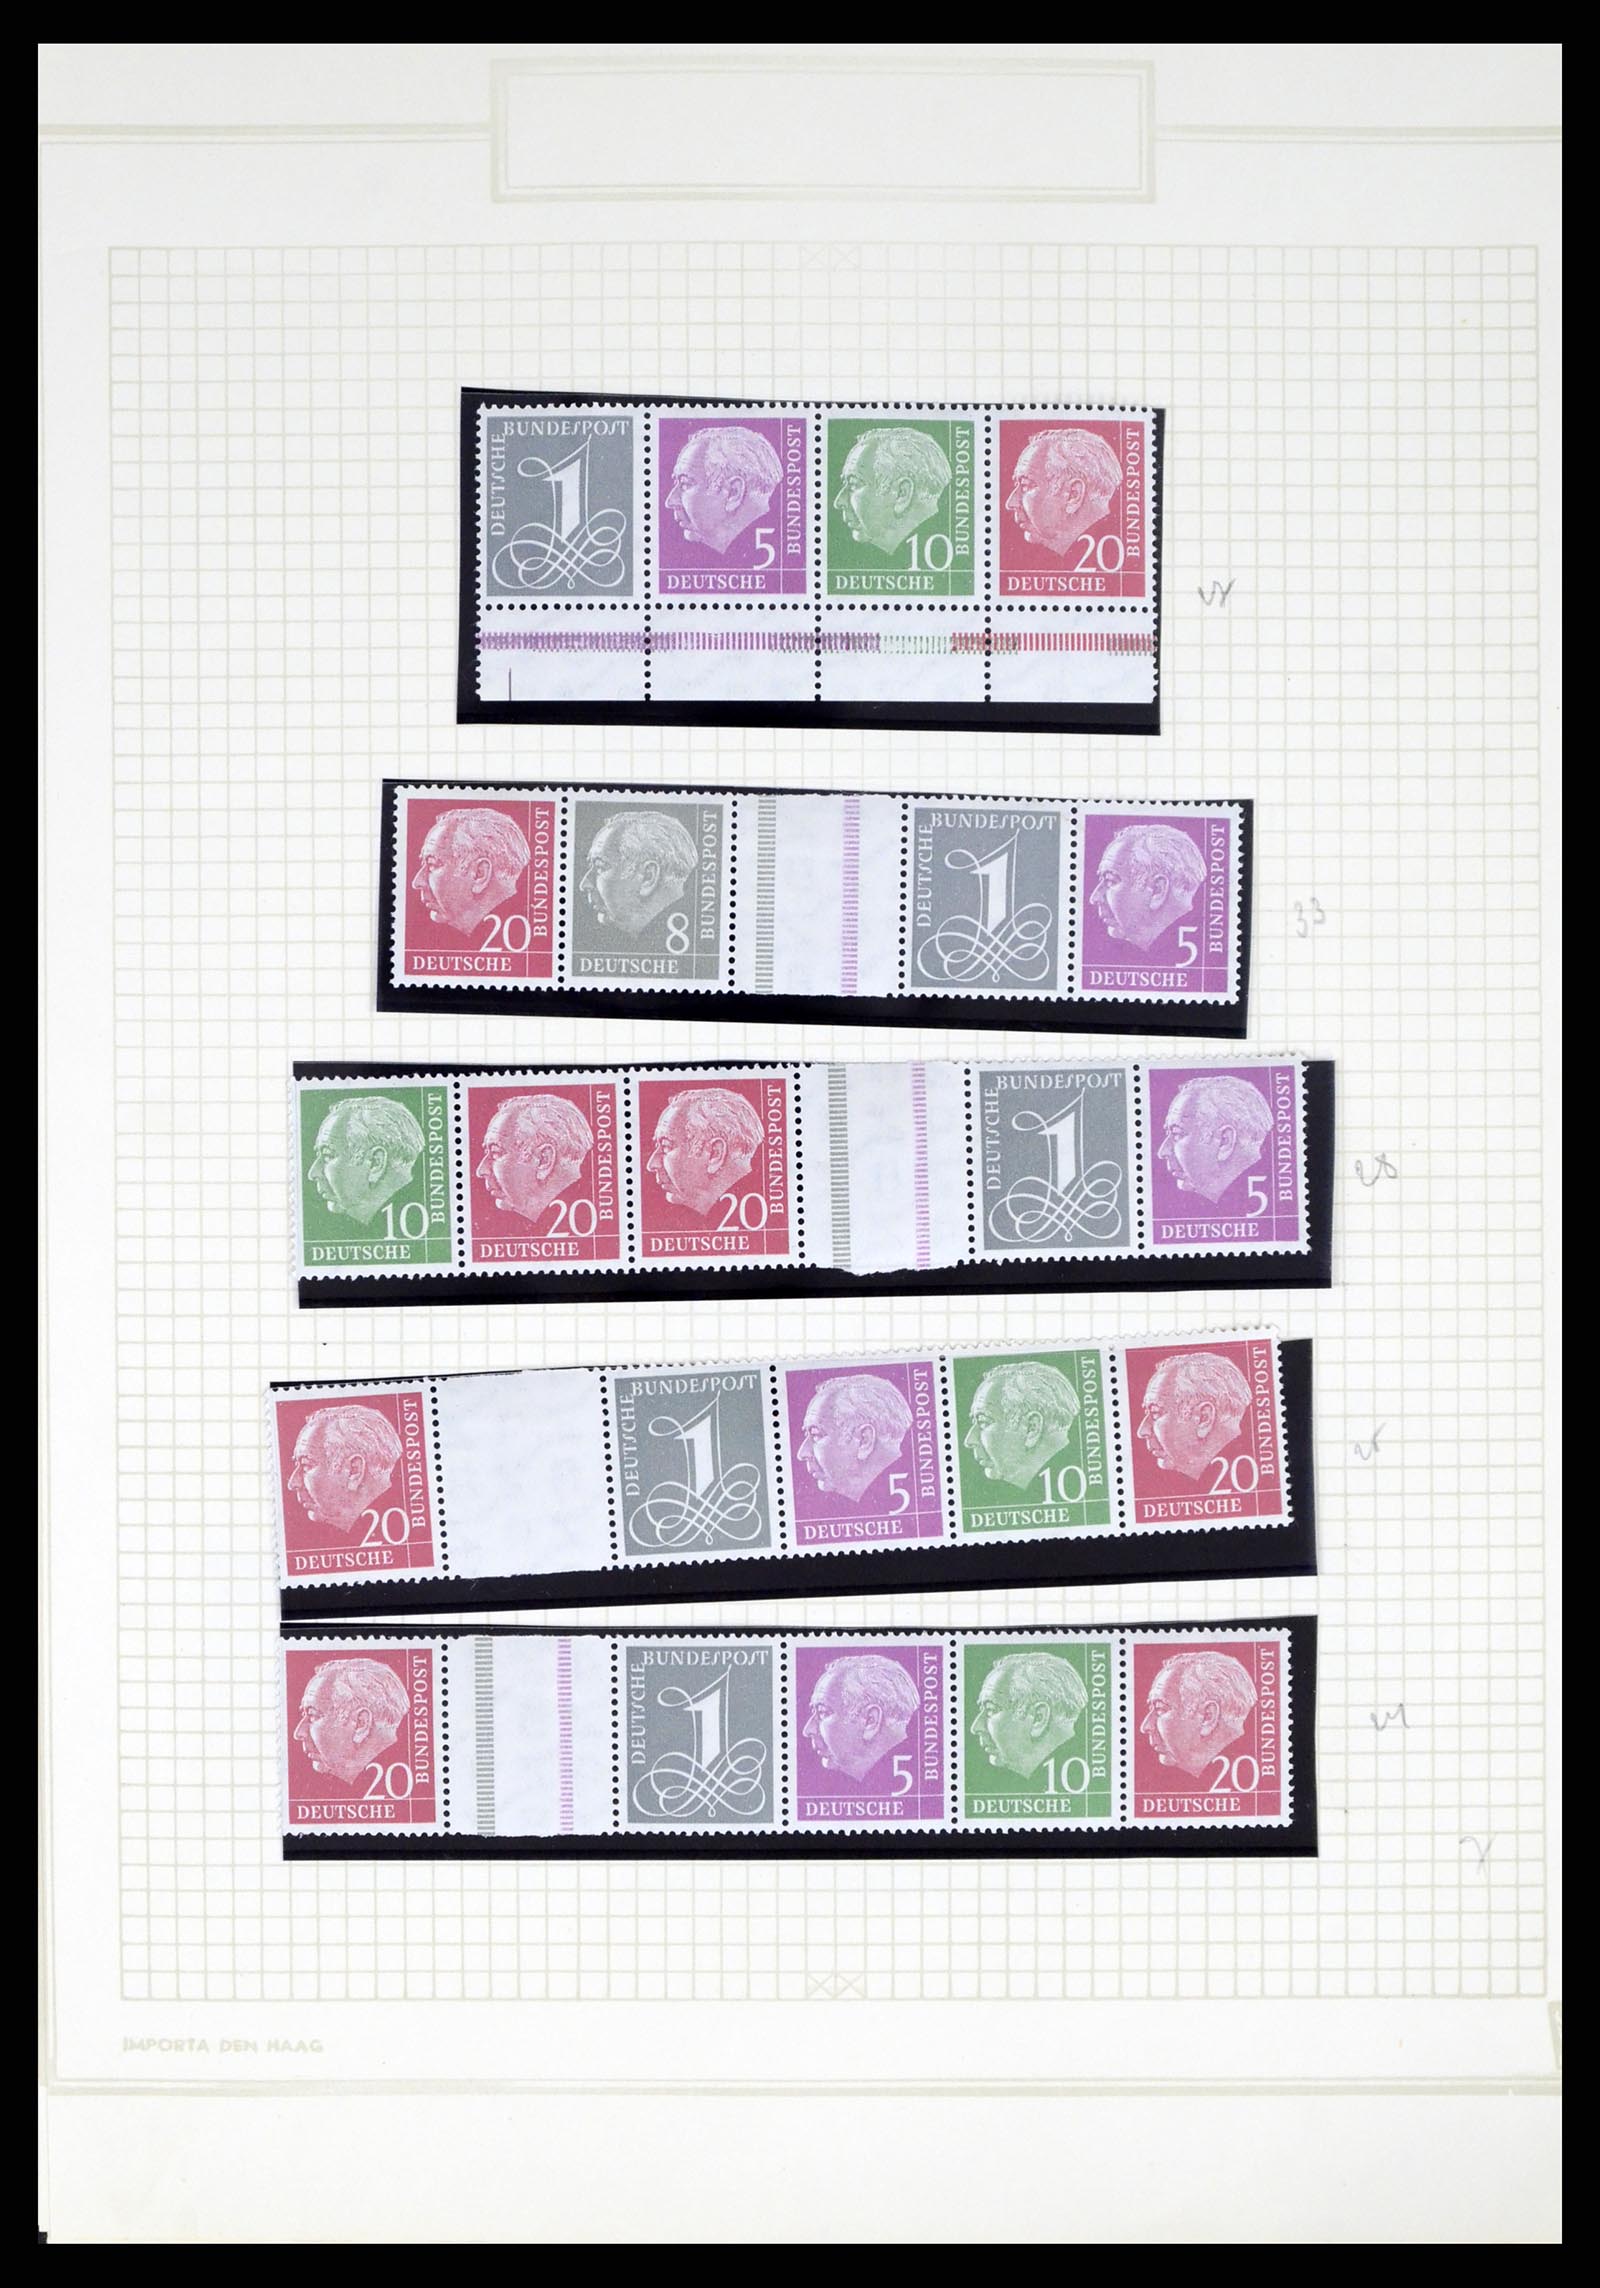 37354 045 - Stamp collection 37354 Bundespost and Berlin 1955-2000.